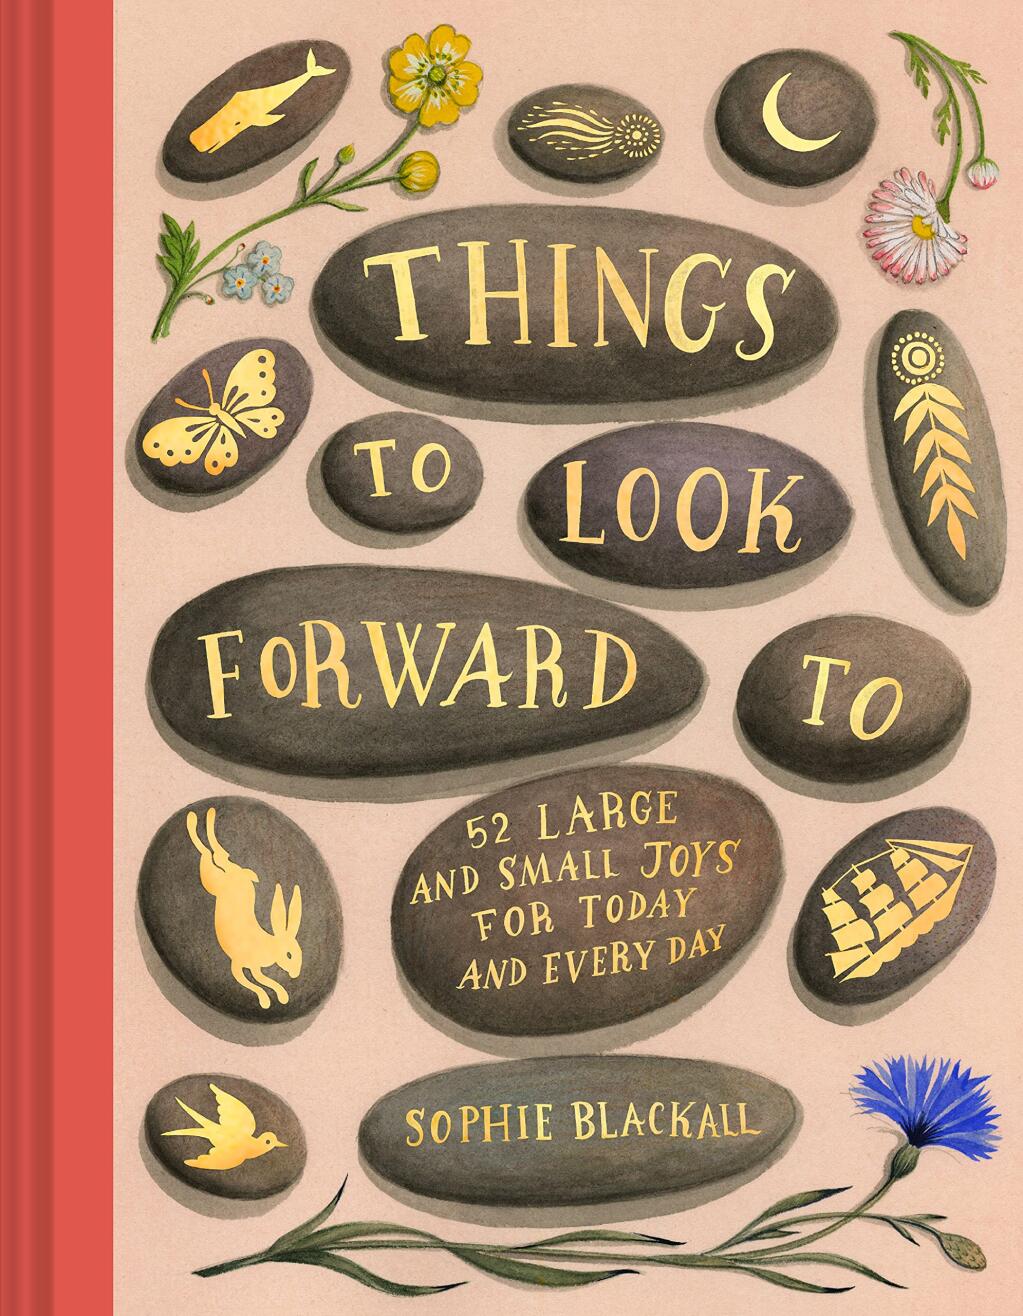 Sophie Blackall’s latest is a top seller at Readers’ Books.